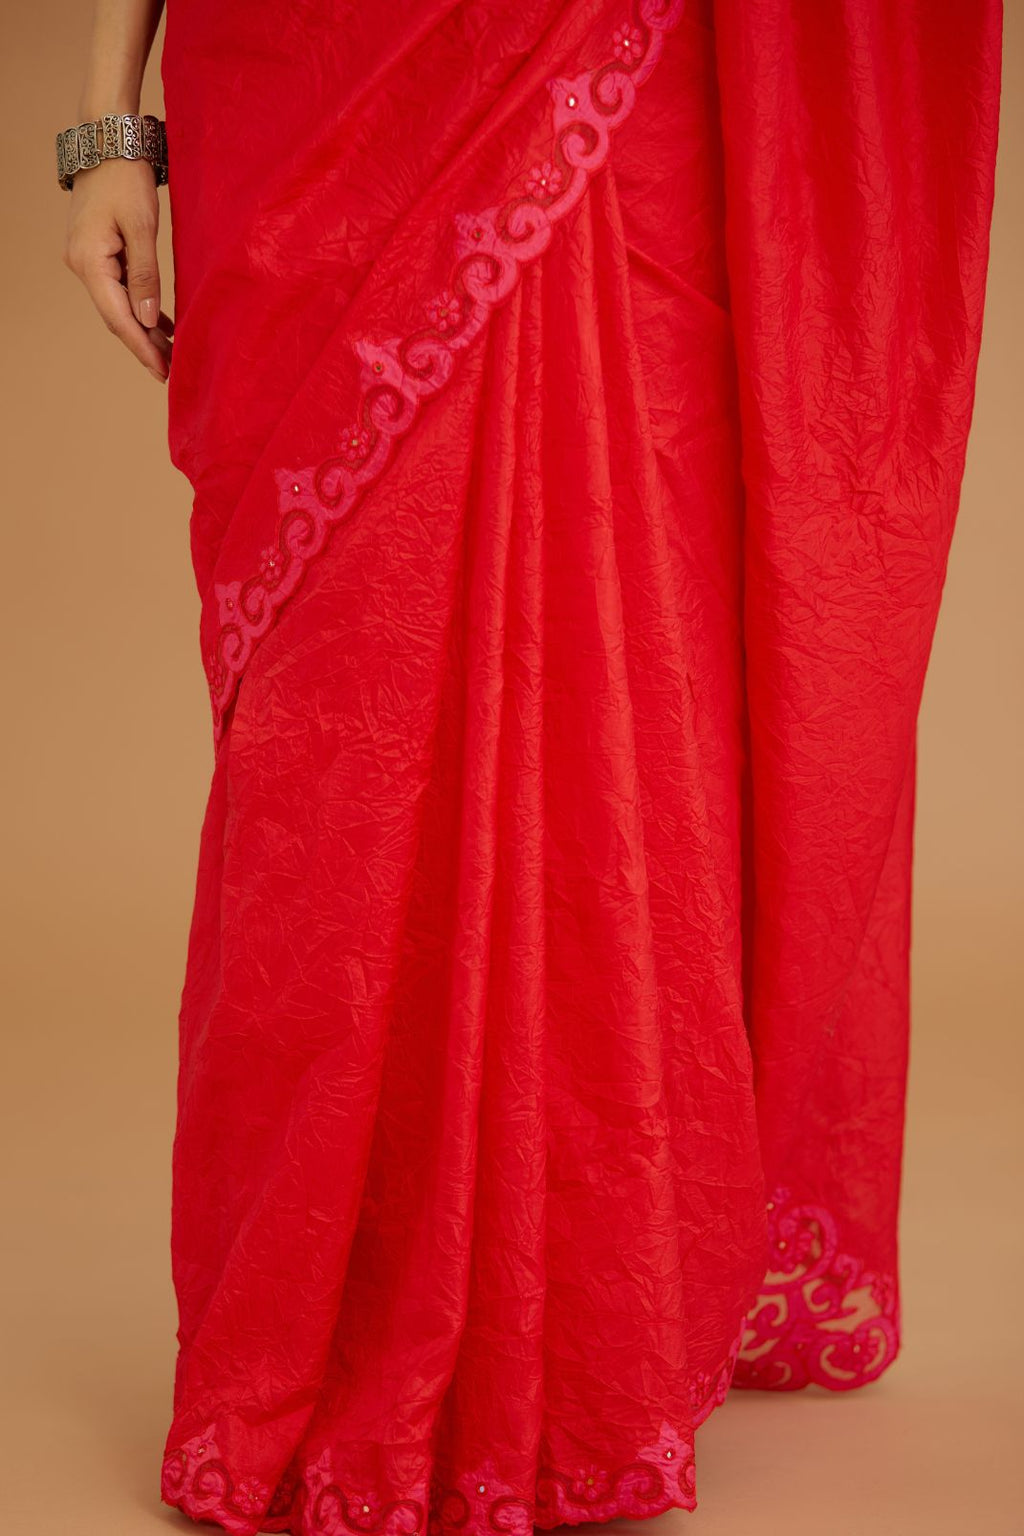 Red hand crushed silk saree set, paired with purple hand crushed silk blouse with vertical inset stripe organza fabric detailing in front, back and sleeves, highlighted with contrasting top stitch.